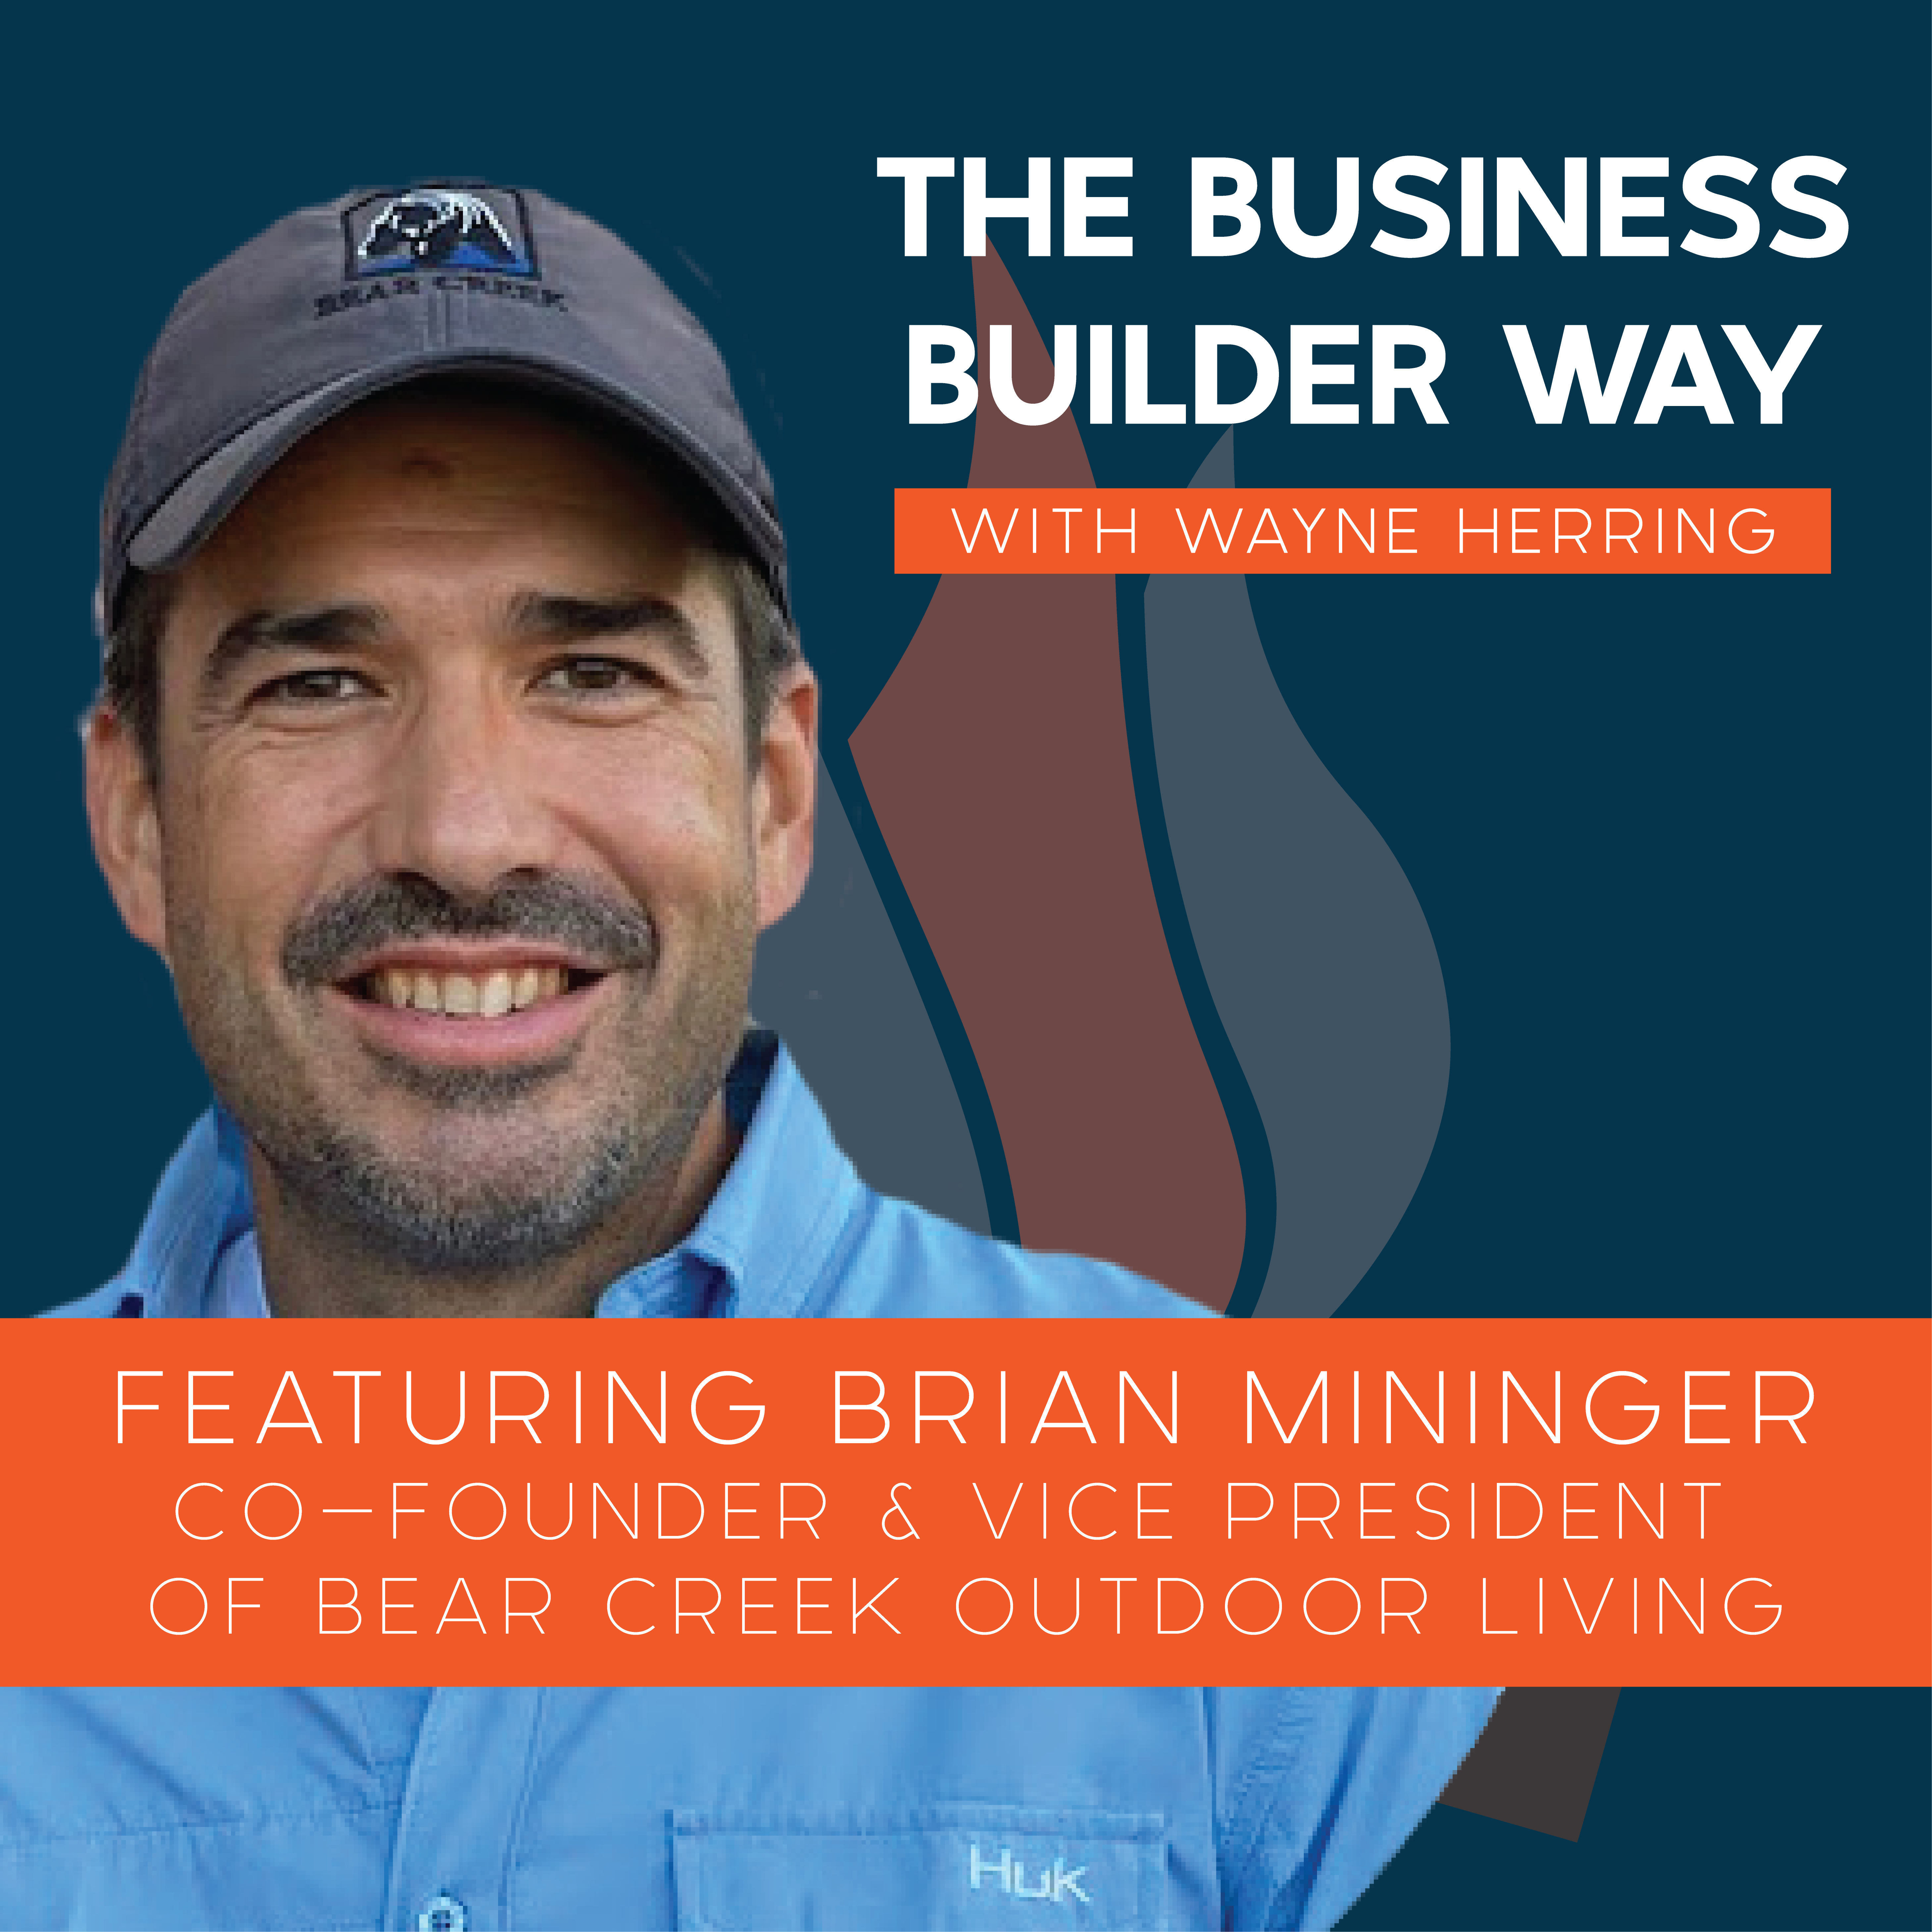 Business Builder Way Podcast image featuring Brian Mininger VP of Bear Creek Outdoor Living.